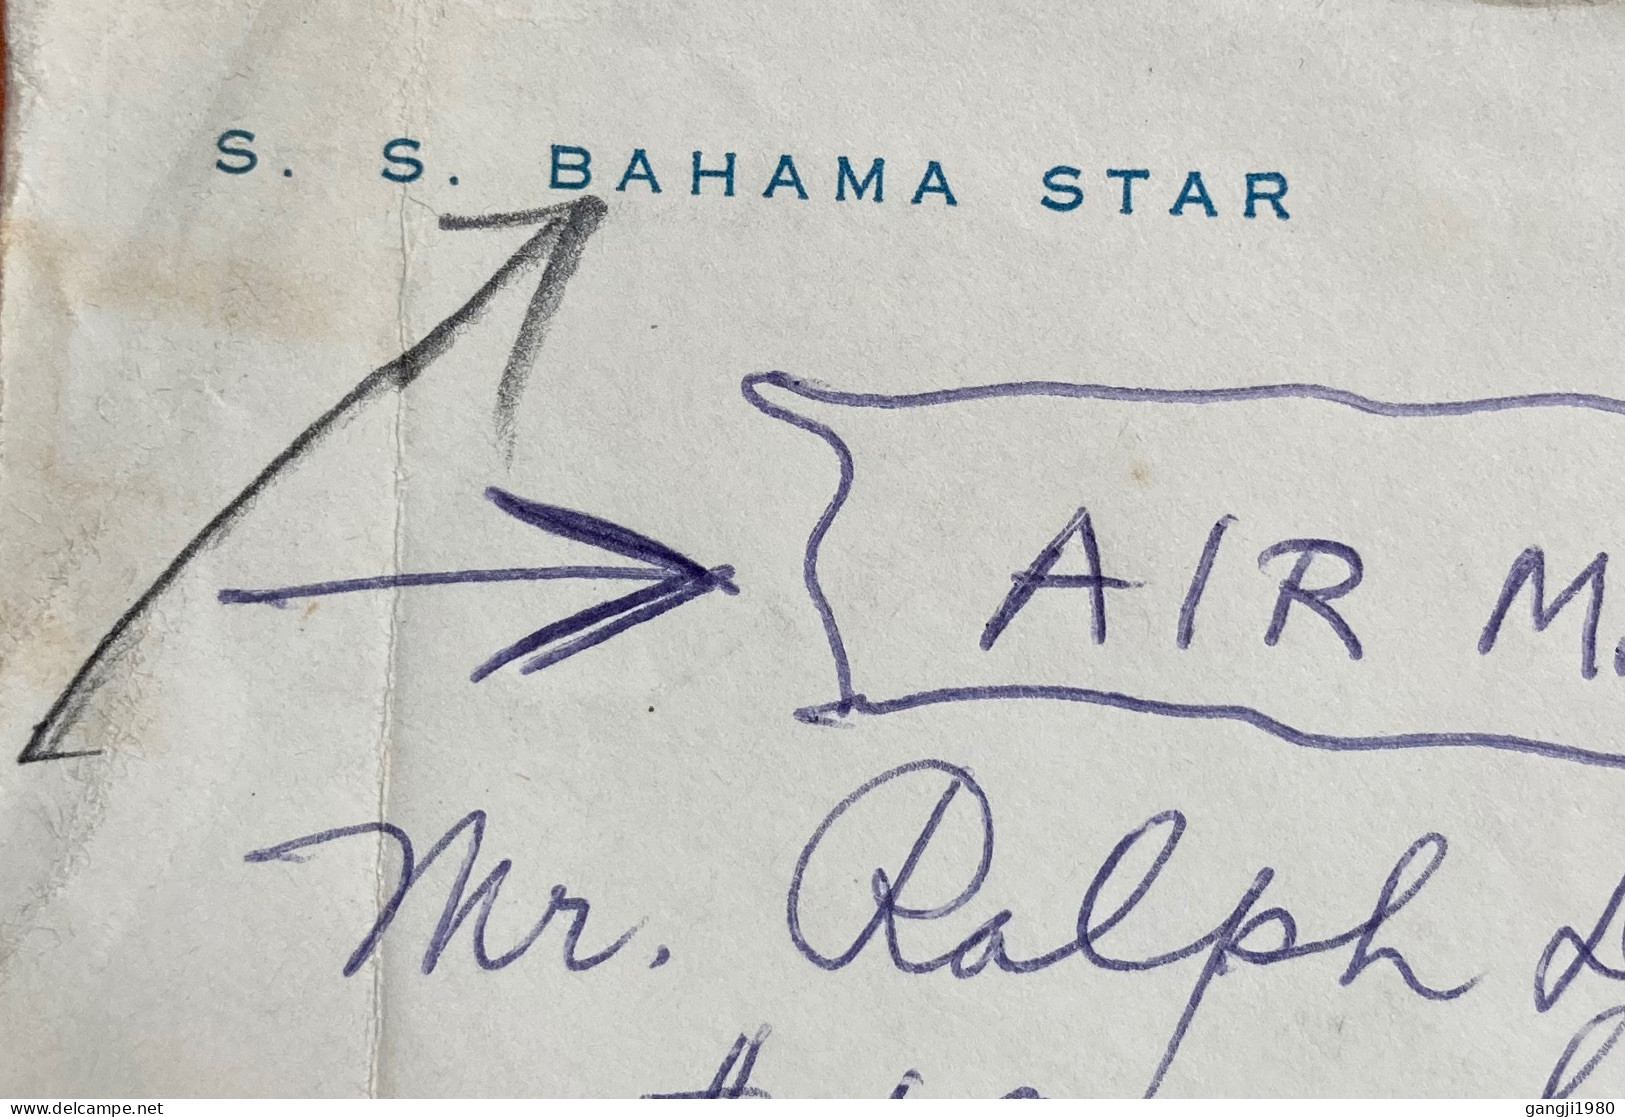 BAHAMAS 1964, SS. BAHAMA STAR. PRIVATE COVER USED TO USA, PARADISE BEACH & QUEEN STAMP, NASSAU CITY WAVY CANCEL - 1963-1973 Ministerial Government